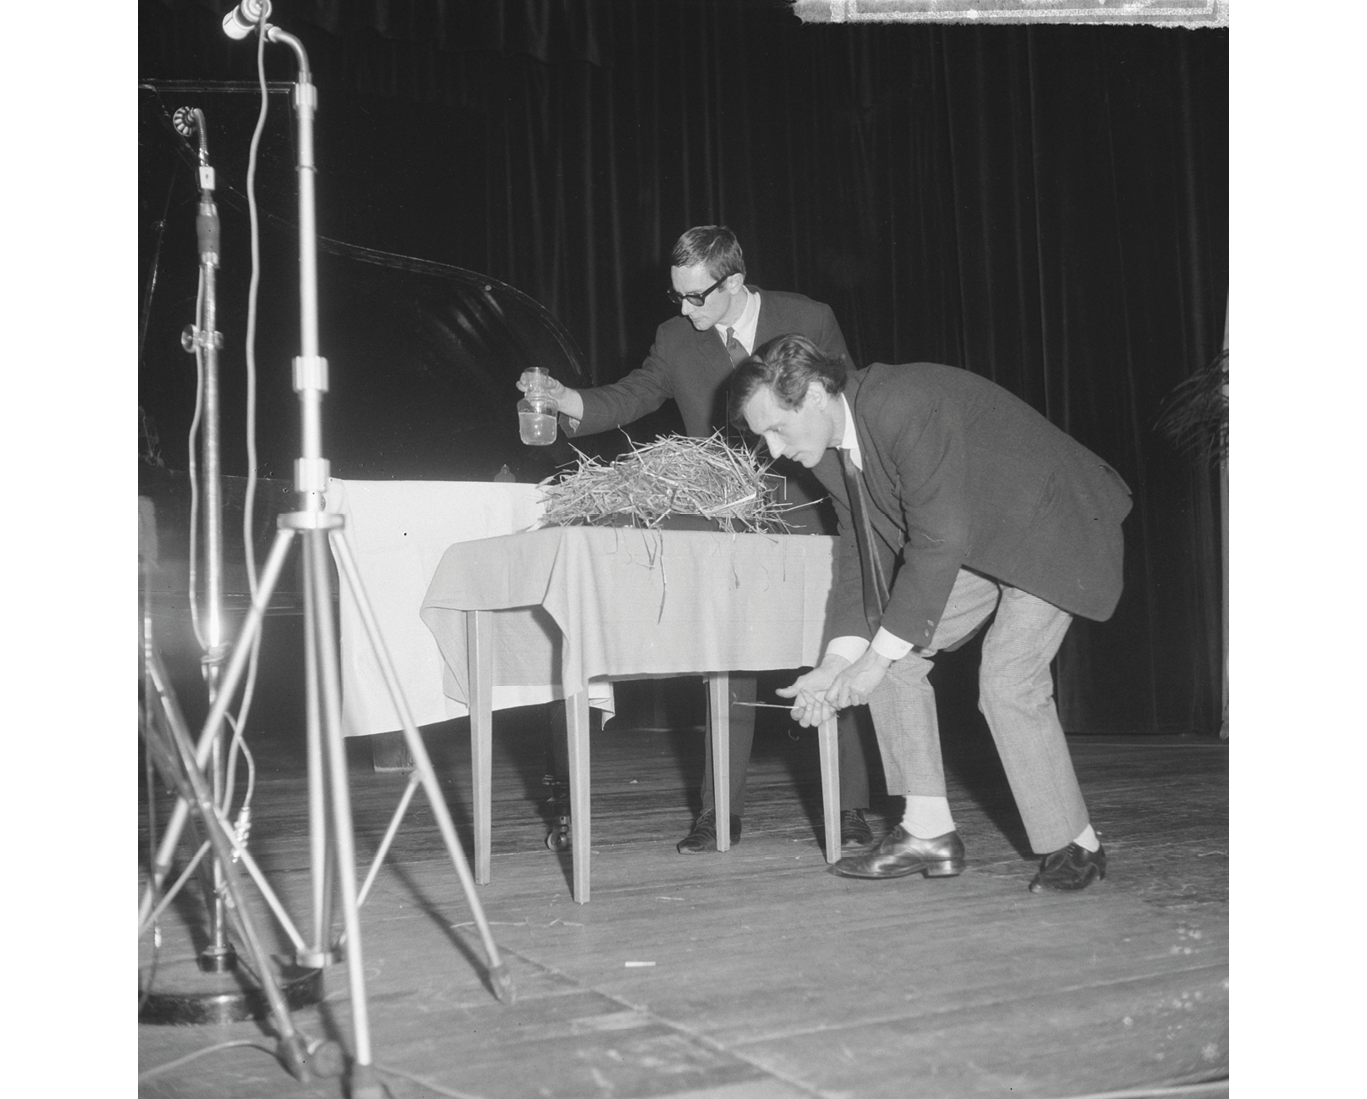 A black and white photograph from 1964 depicting a Fluxus concert at Kurhaus Scheveningen: two Fluxus artists attempt an experiment with a table full of straw and an unknown liquid; to the left rest two microphone stands.